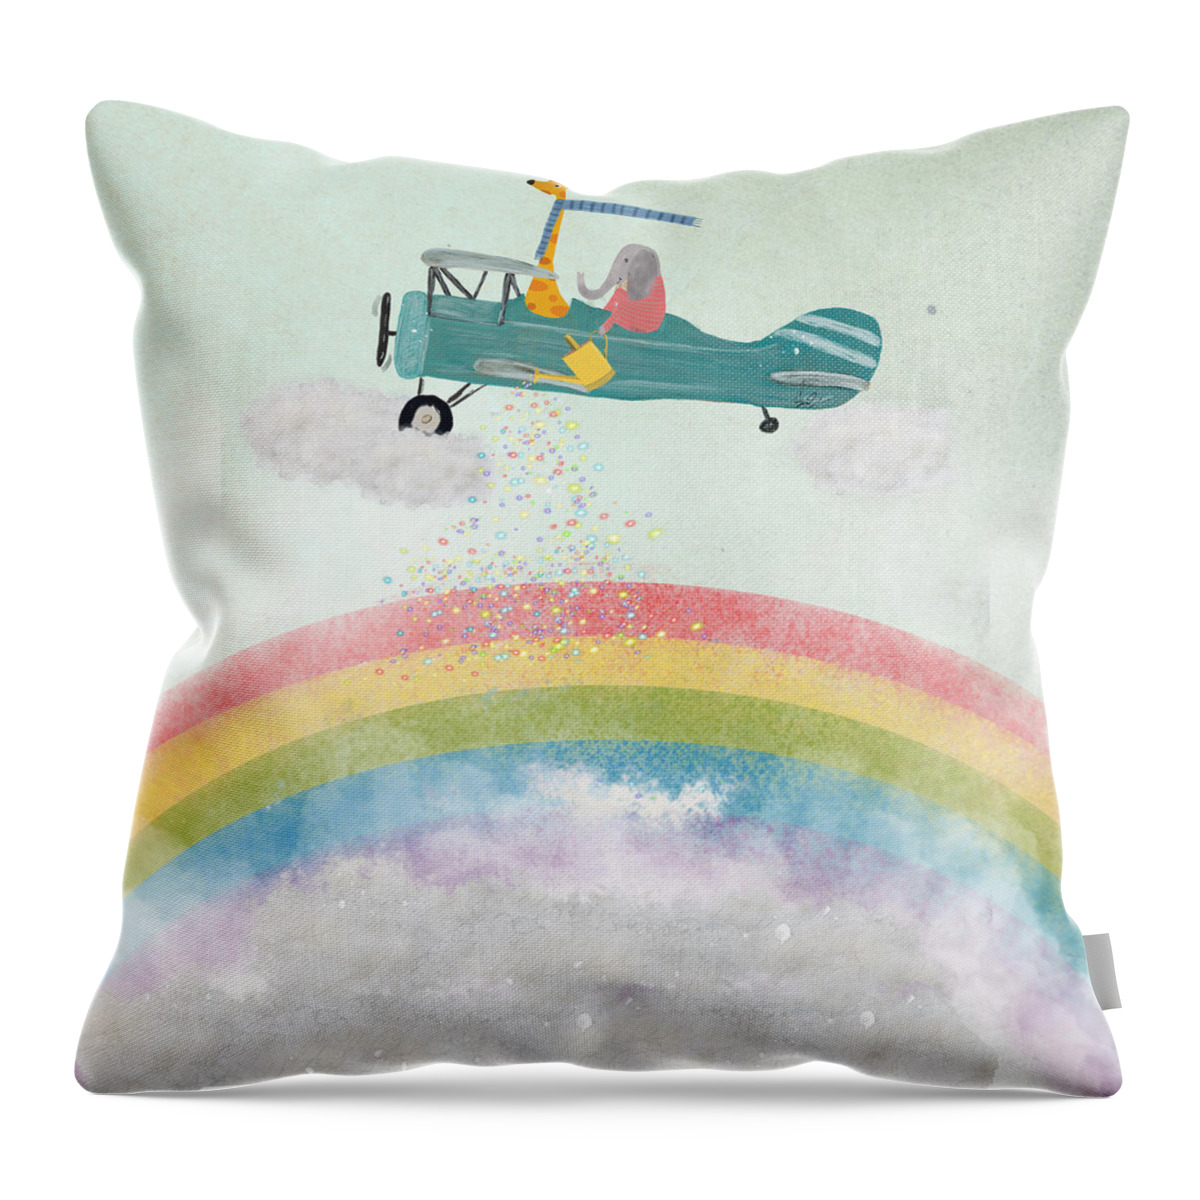 Rainbows Throw Pillow featuring the painting Creating Rainbows by Bri Buckley